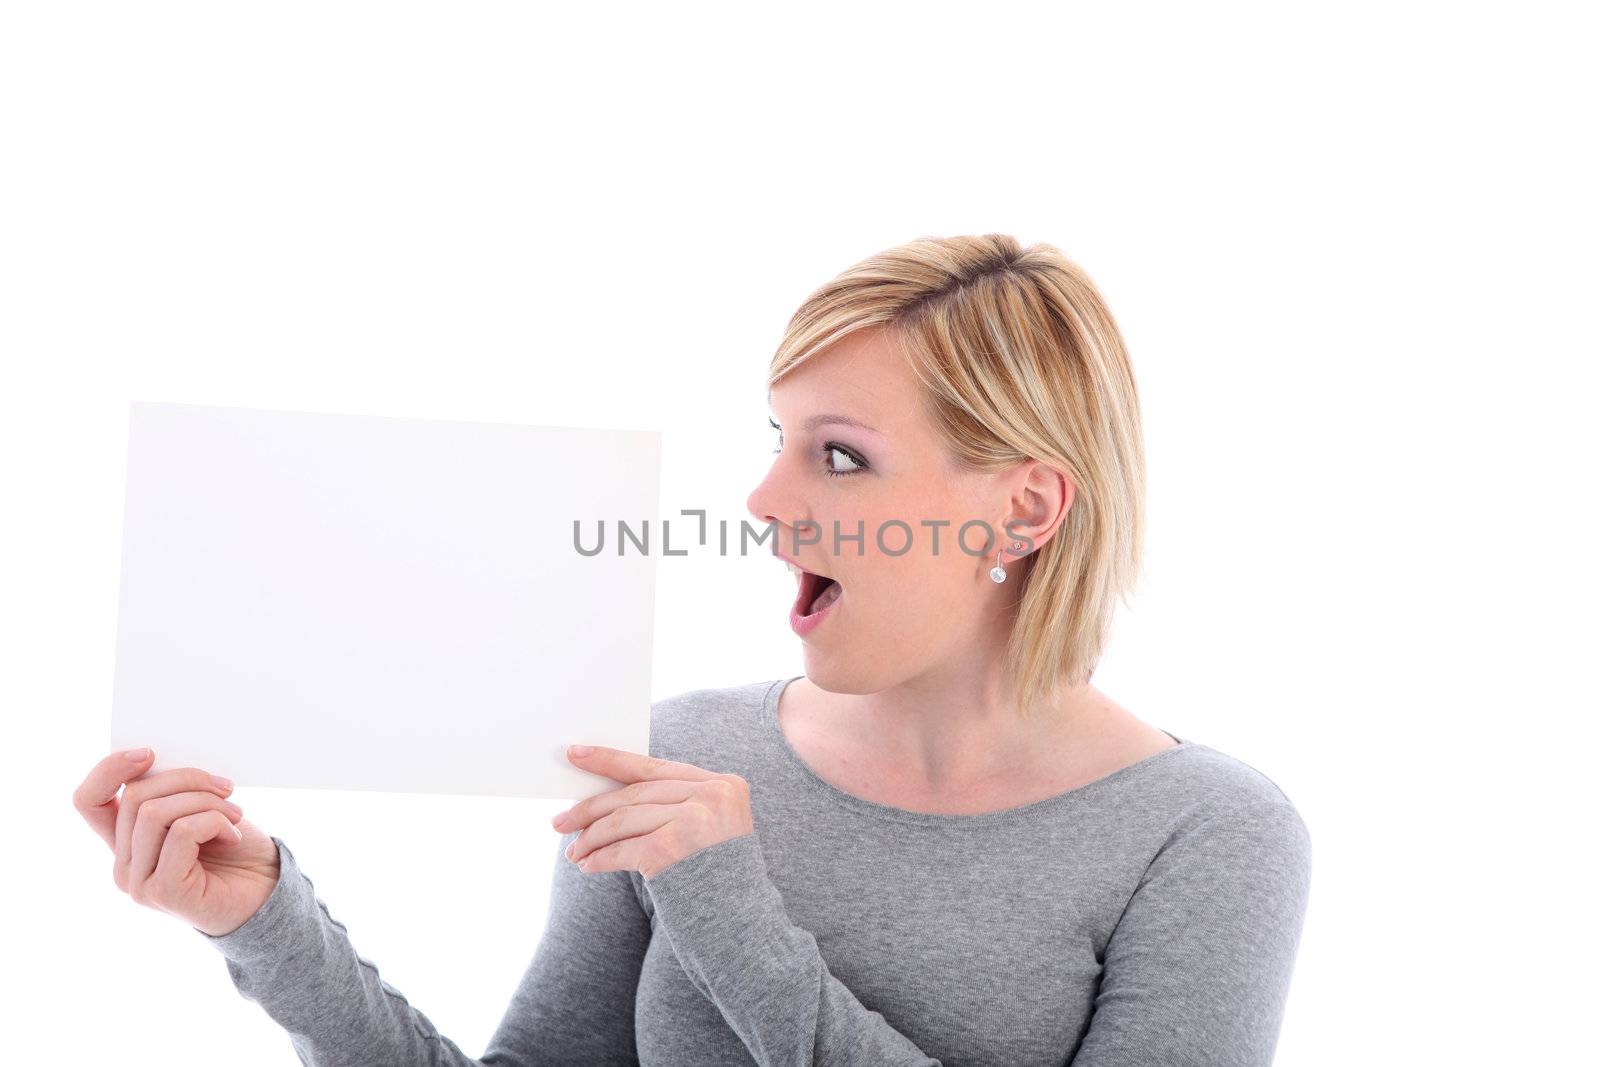 Woman with her mouth open in surprise looking at a blank sign that she is holding up to her side 